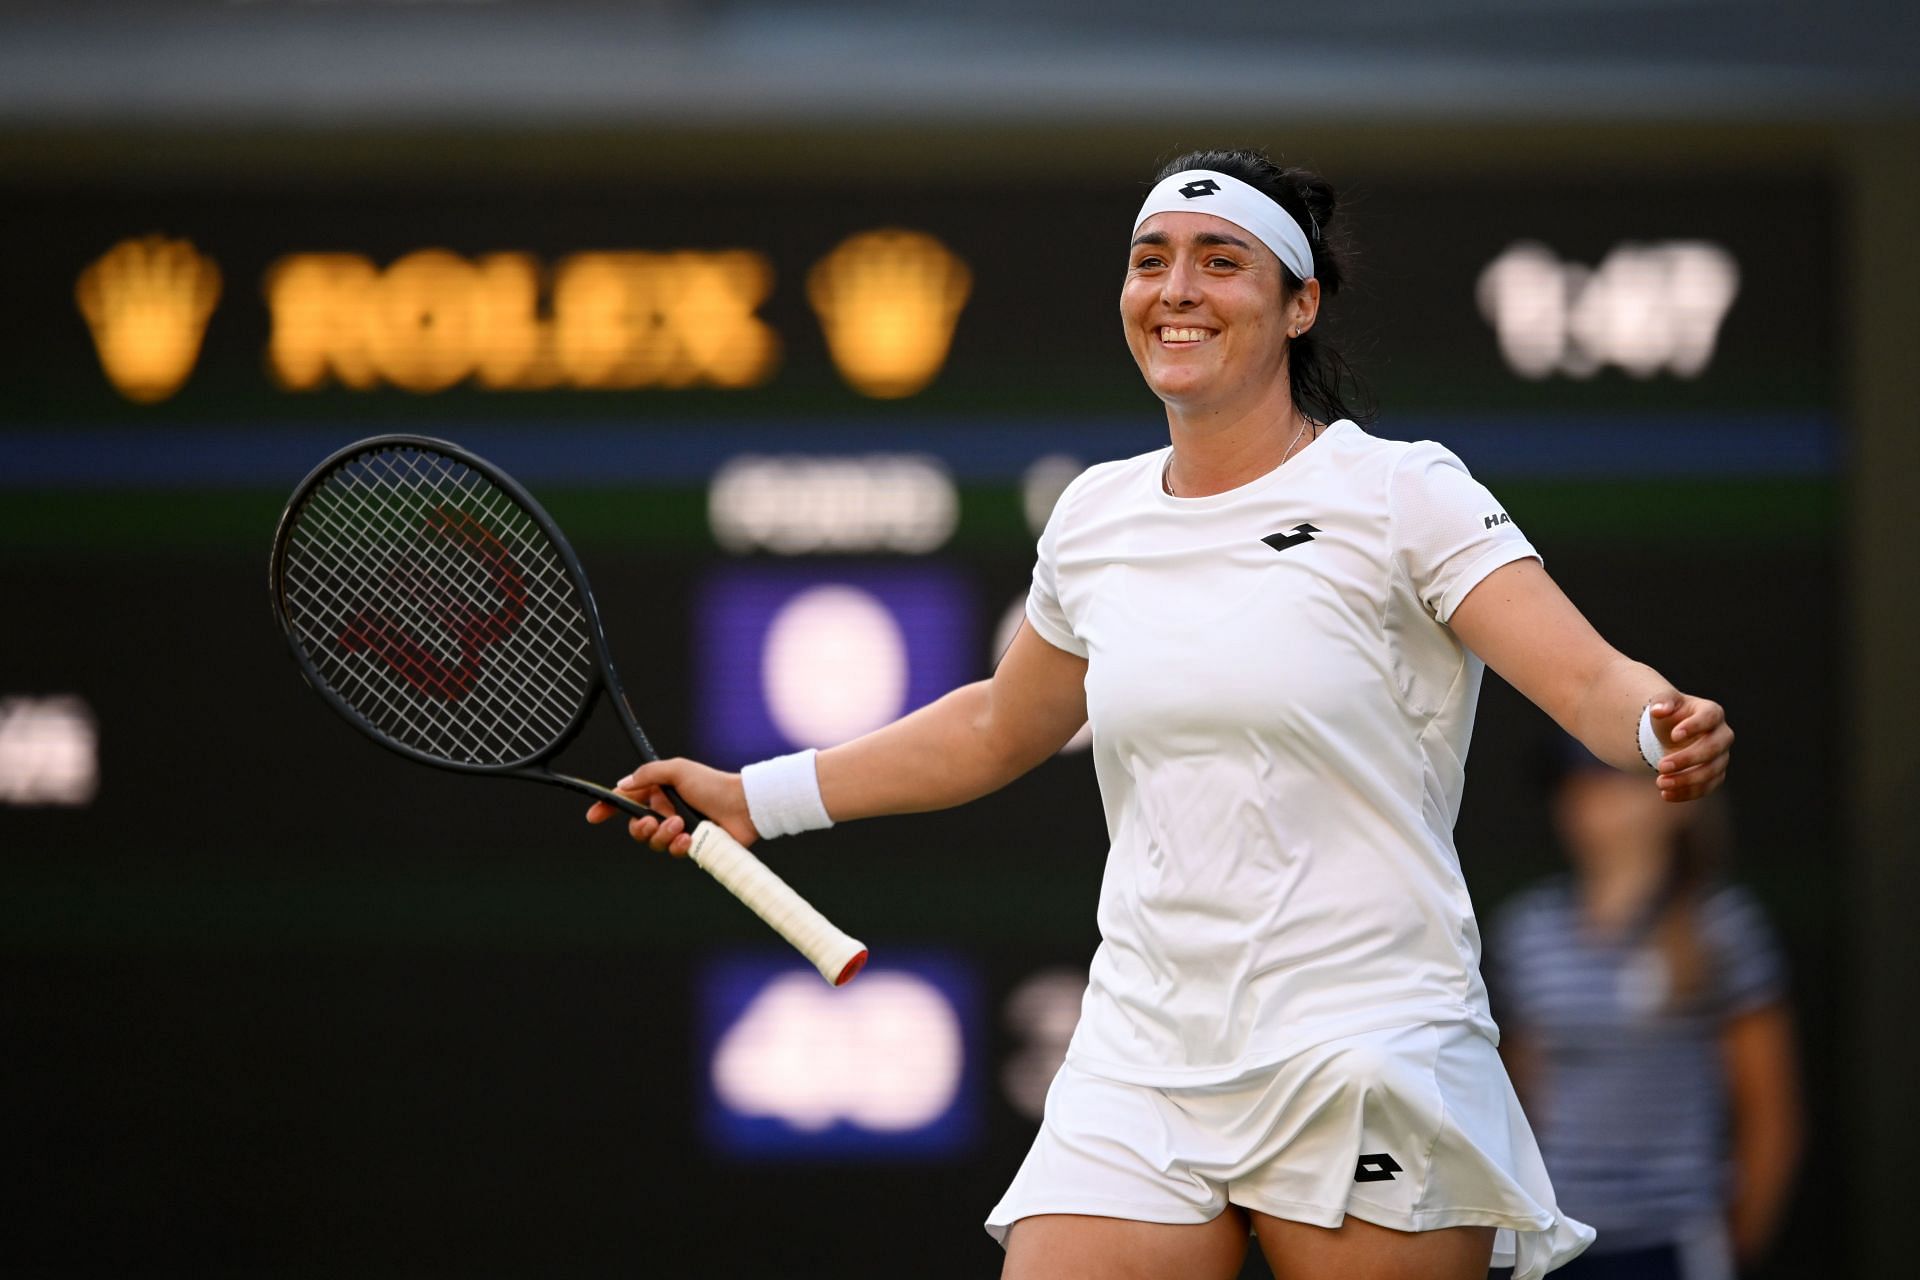 Emma Raducanu vs Ons Jabeur Where to watch, TV schedule, Live streaming details, and more Mubadala World Tennis Championship 2022